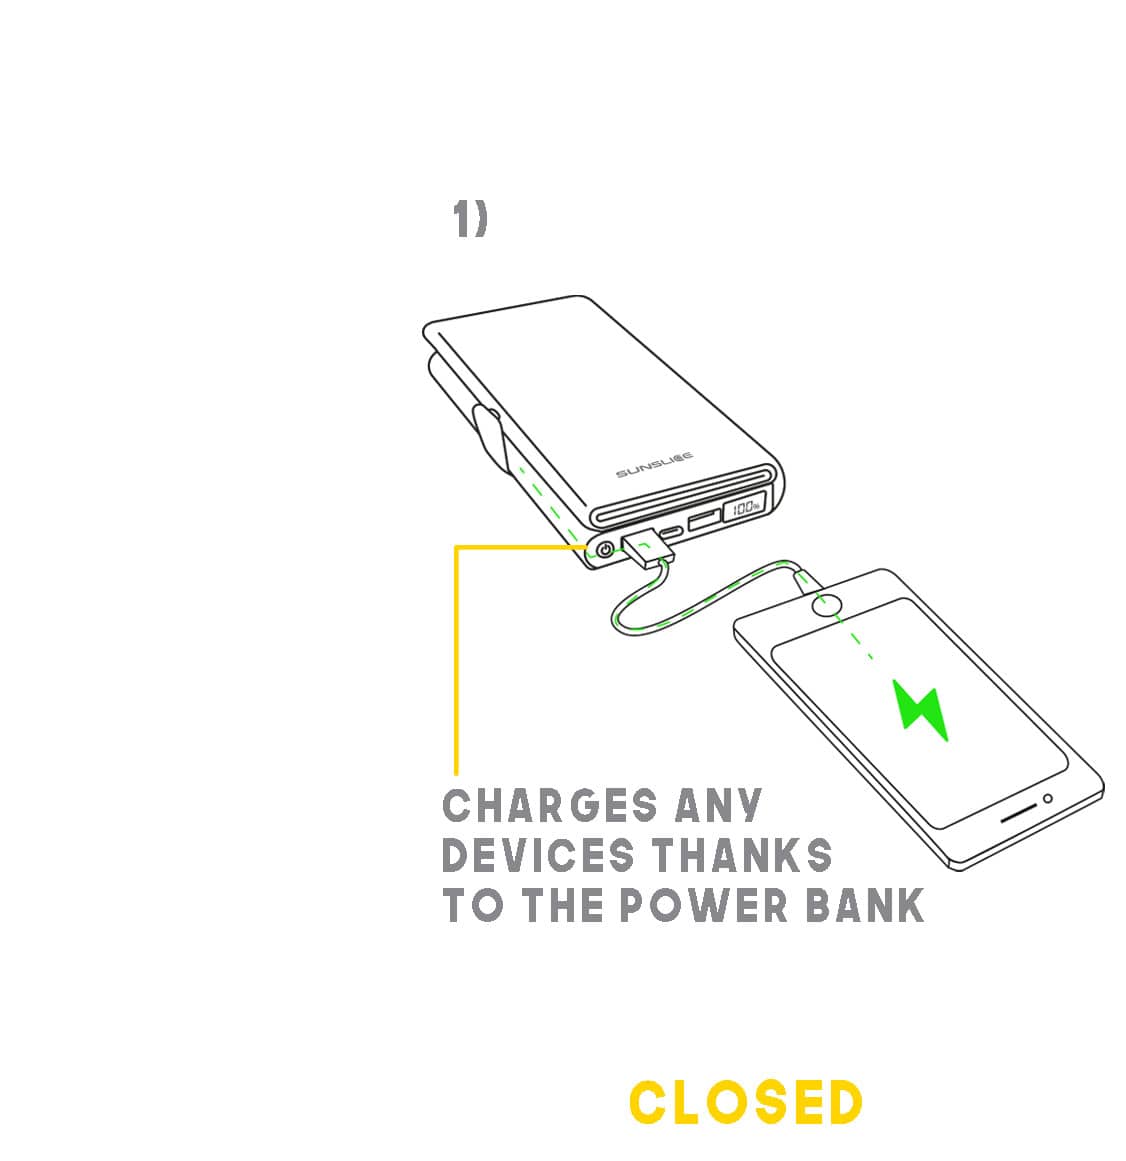 show the colsed electron chaging a phone thanks to it integrated power bank